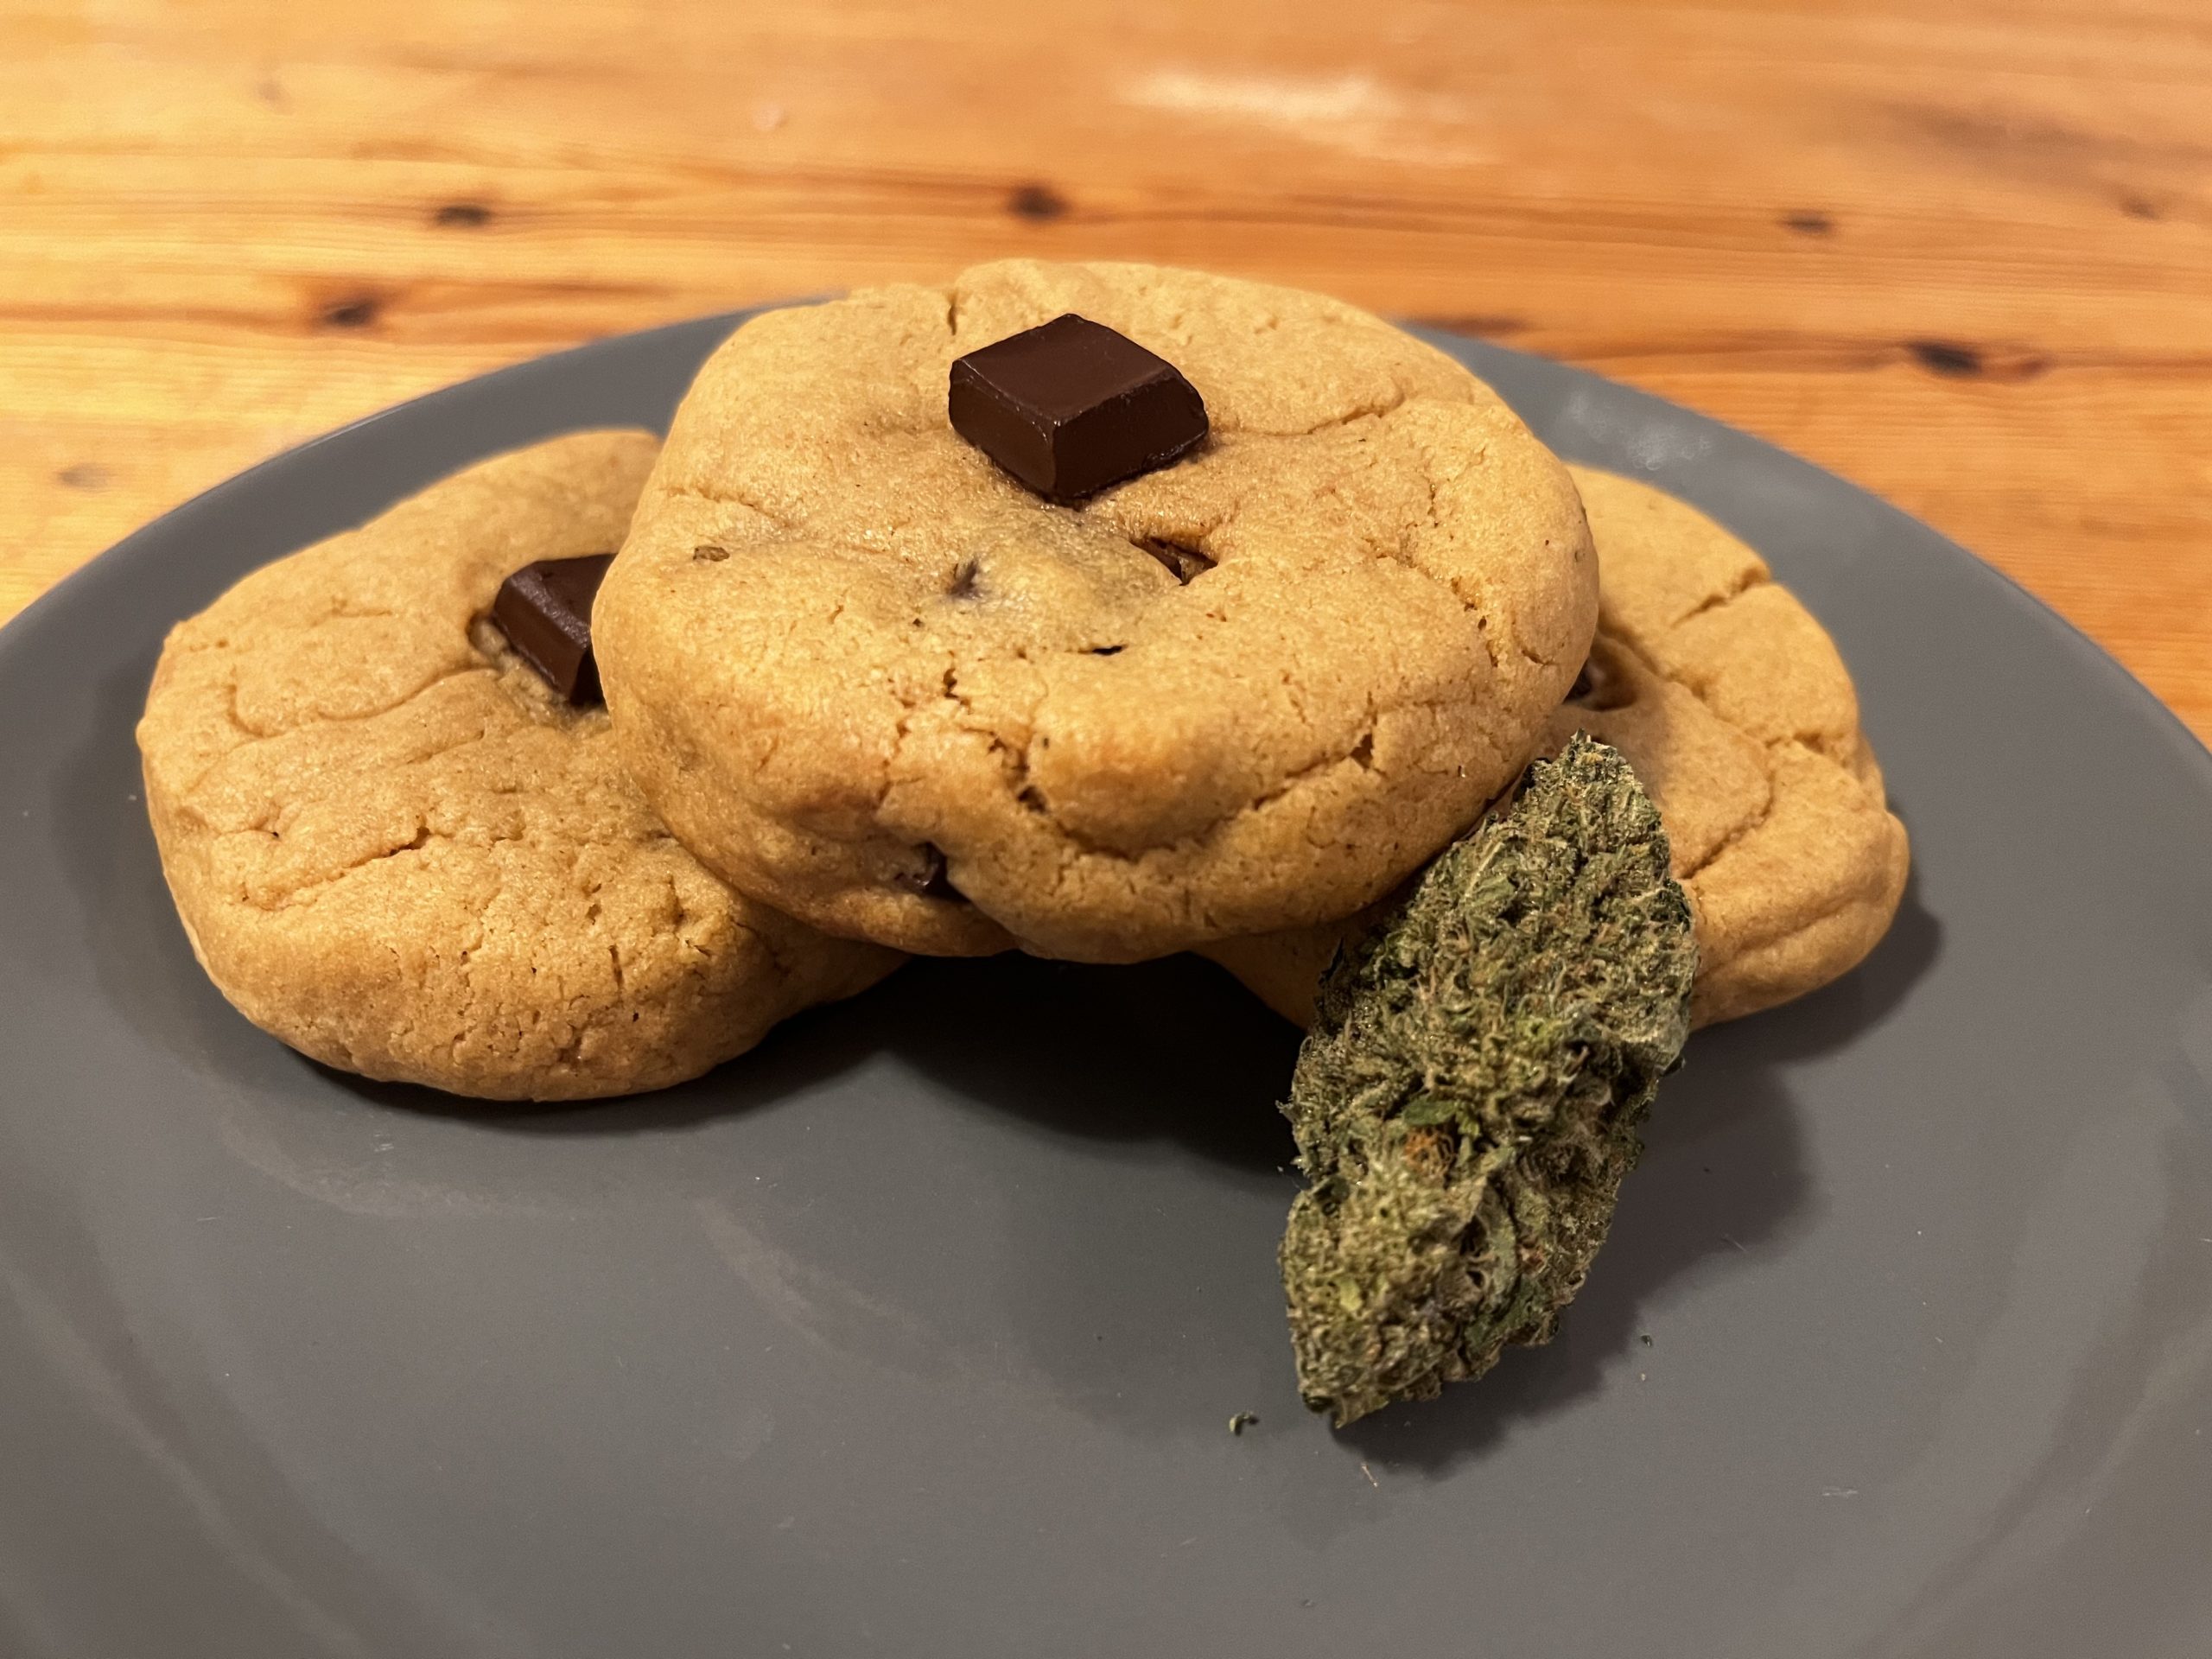 Peanut butter cookies with a cannabis flower and chocolate on top, photo by Atum Beckett.